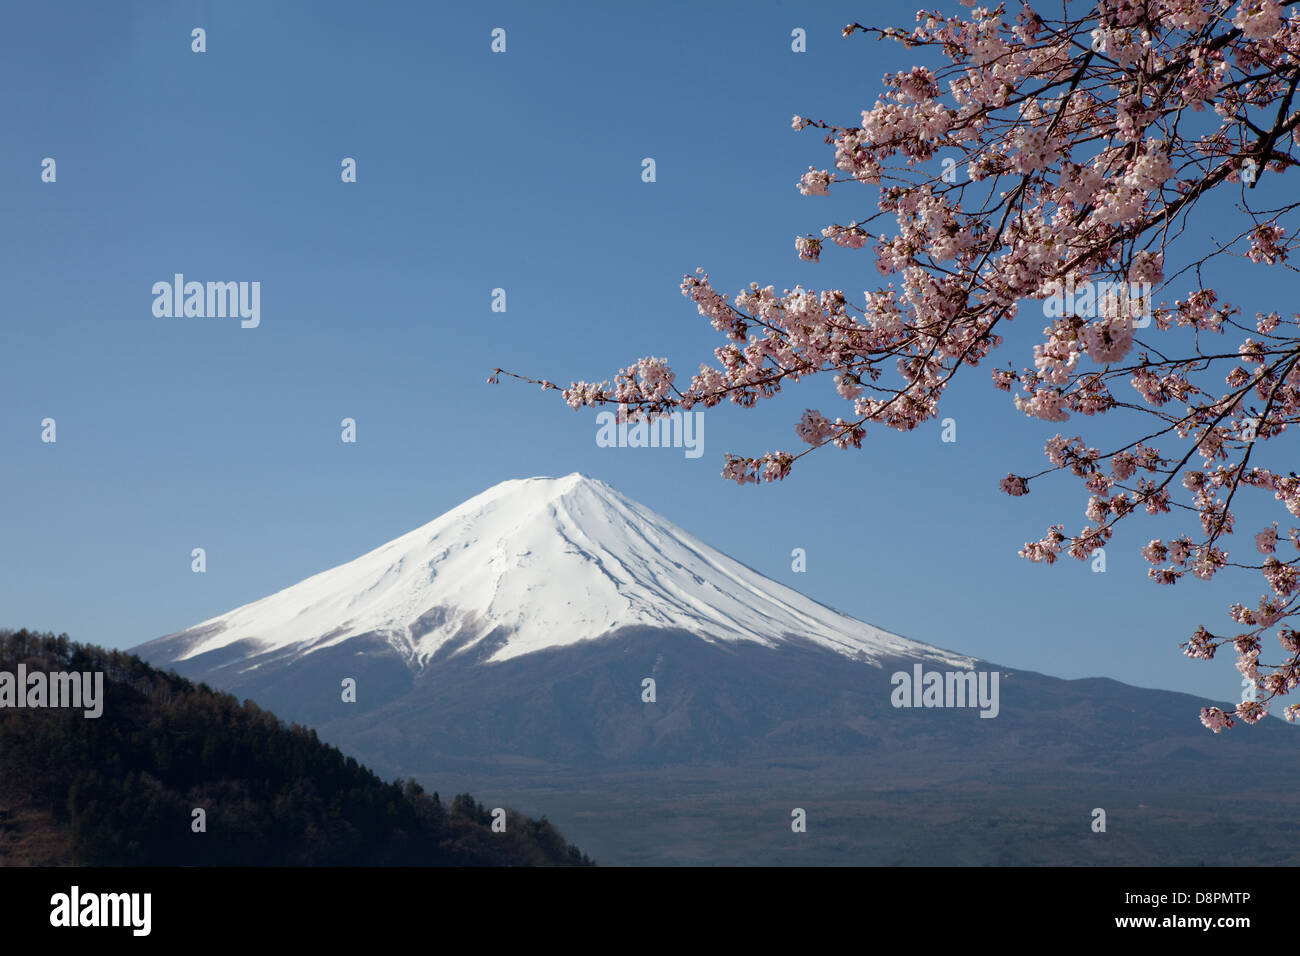 Mount Fuji and cherry blossoms Stock Photo